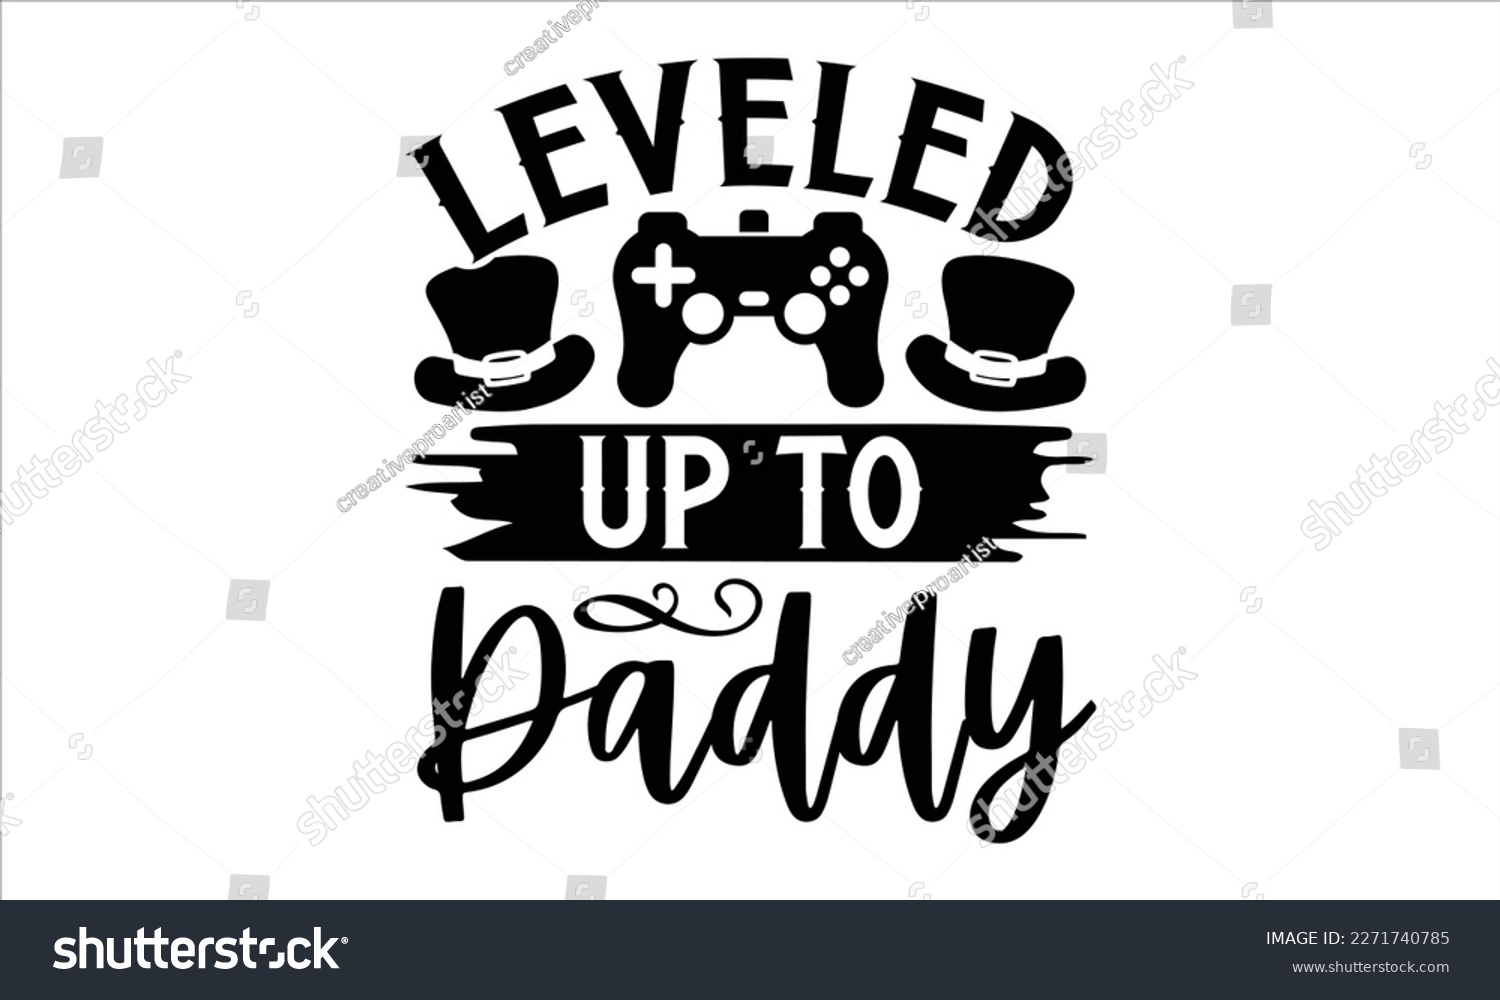 SVG of Leveled up to daddy- Father's Day svg design, Hand drawn lettering phrase isolated on white background, Illustration for prints on t-shirts and bags, posters, cards eps 10. svg